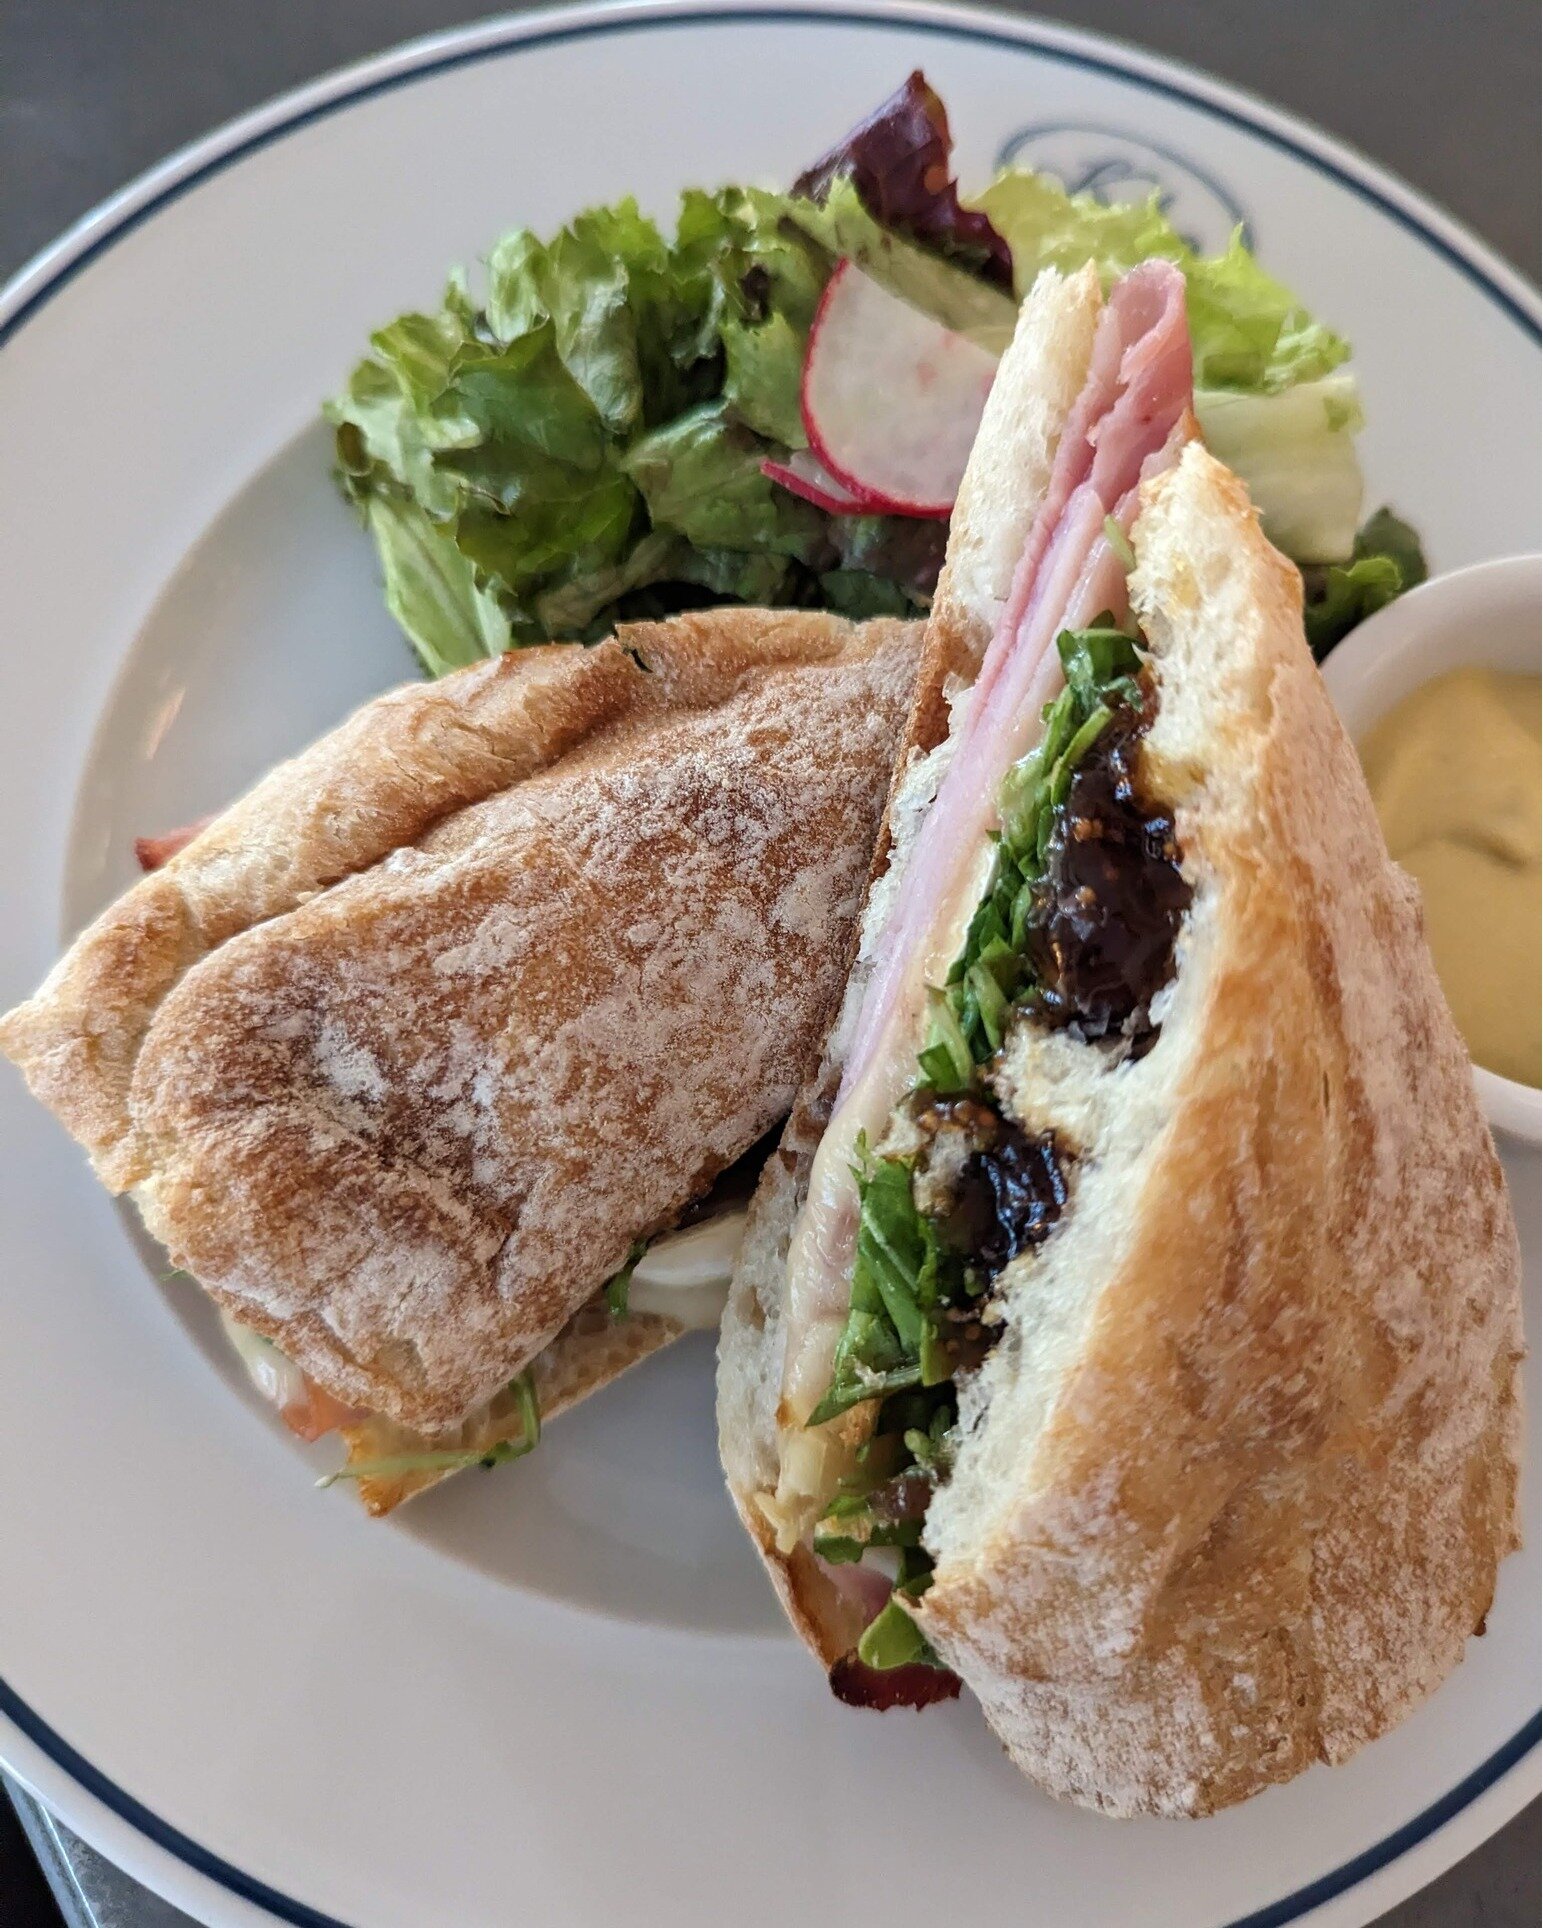 Let's lunch! Classic sandwiches &amp; full menu available all day, every day.